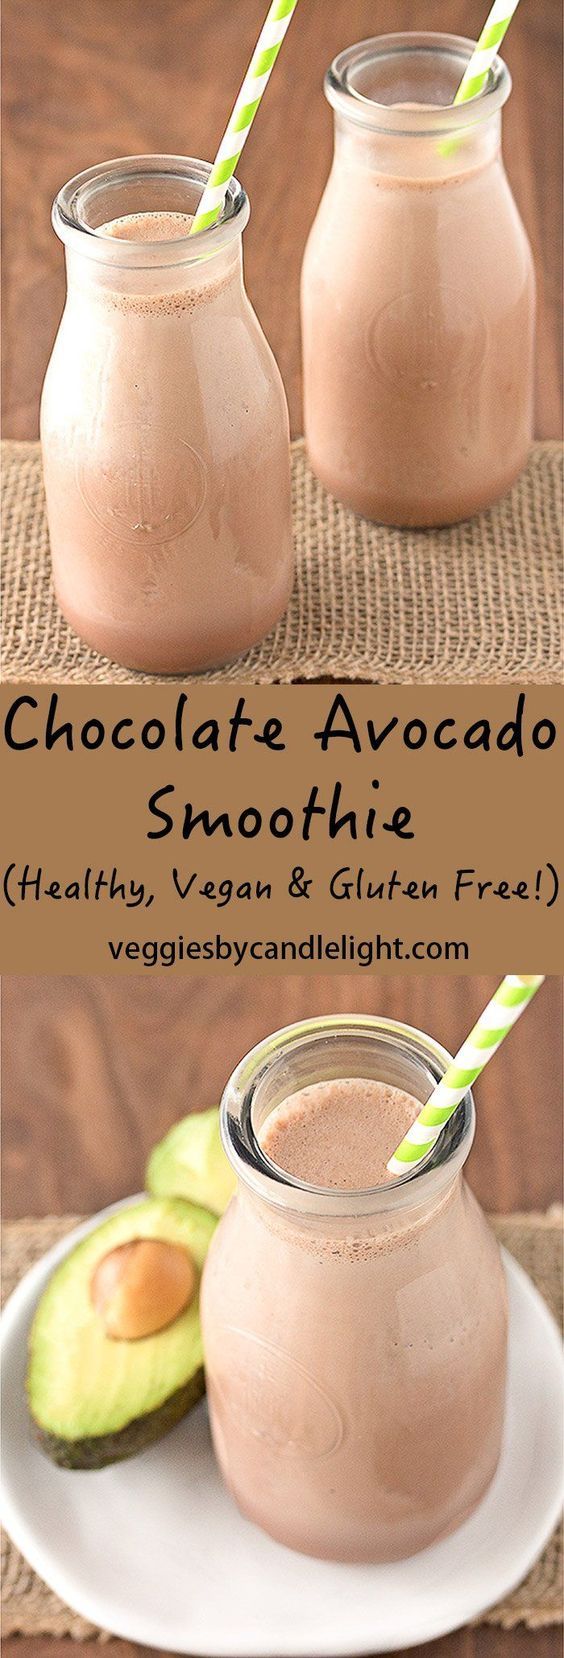 Find out why people are loving healthy breakfast smoothies with this awesome post. Learn what makes breakfast smoothies healthy. #nutrition #nobake #healthyrecipes #healthymeals #mealprep #healthyeating #healthyliving #healthylifestyle